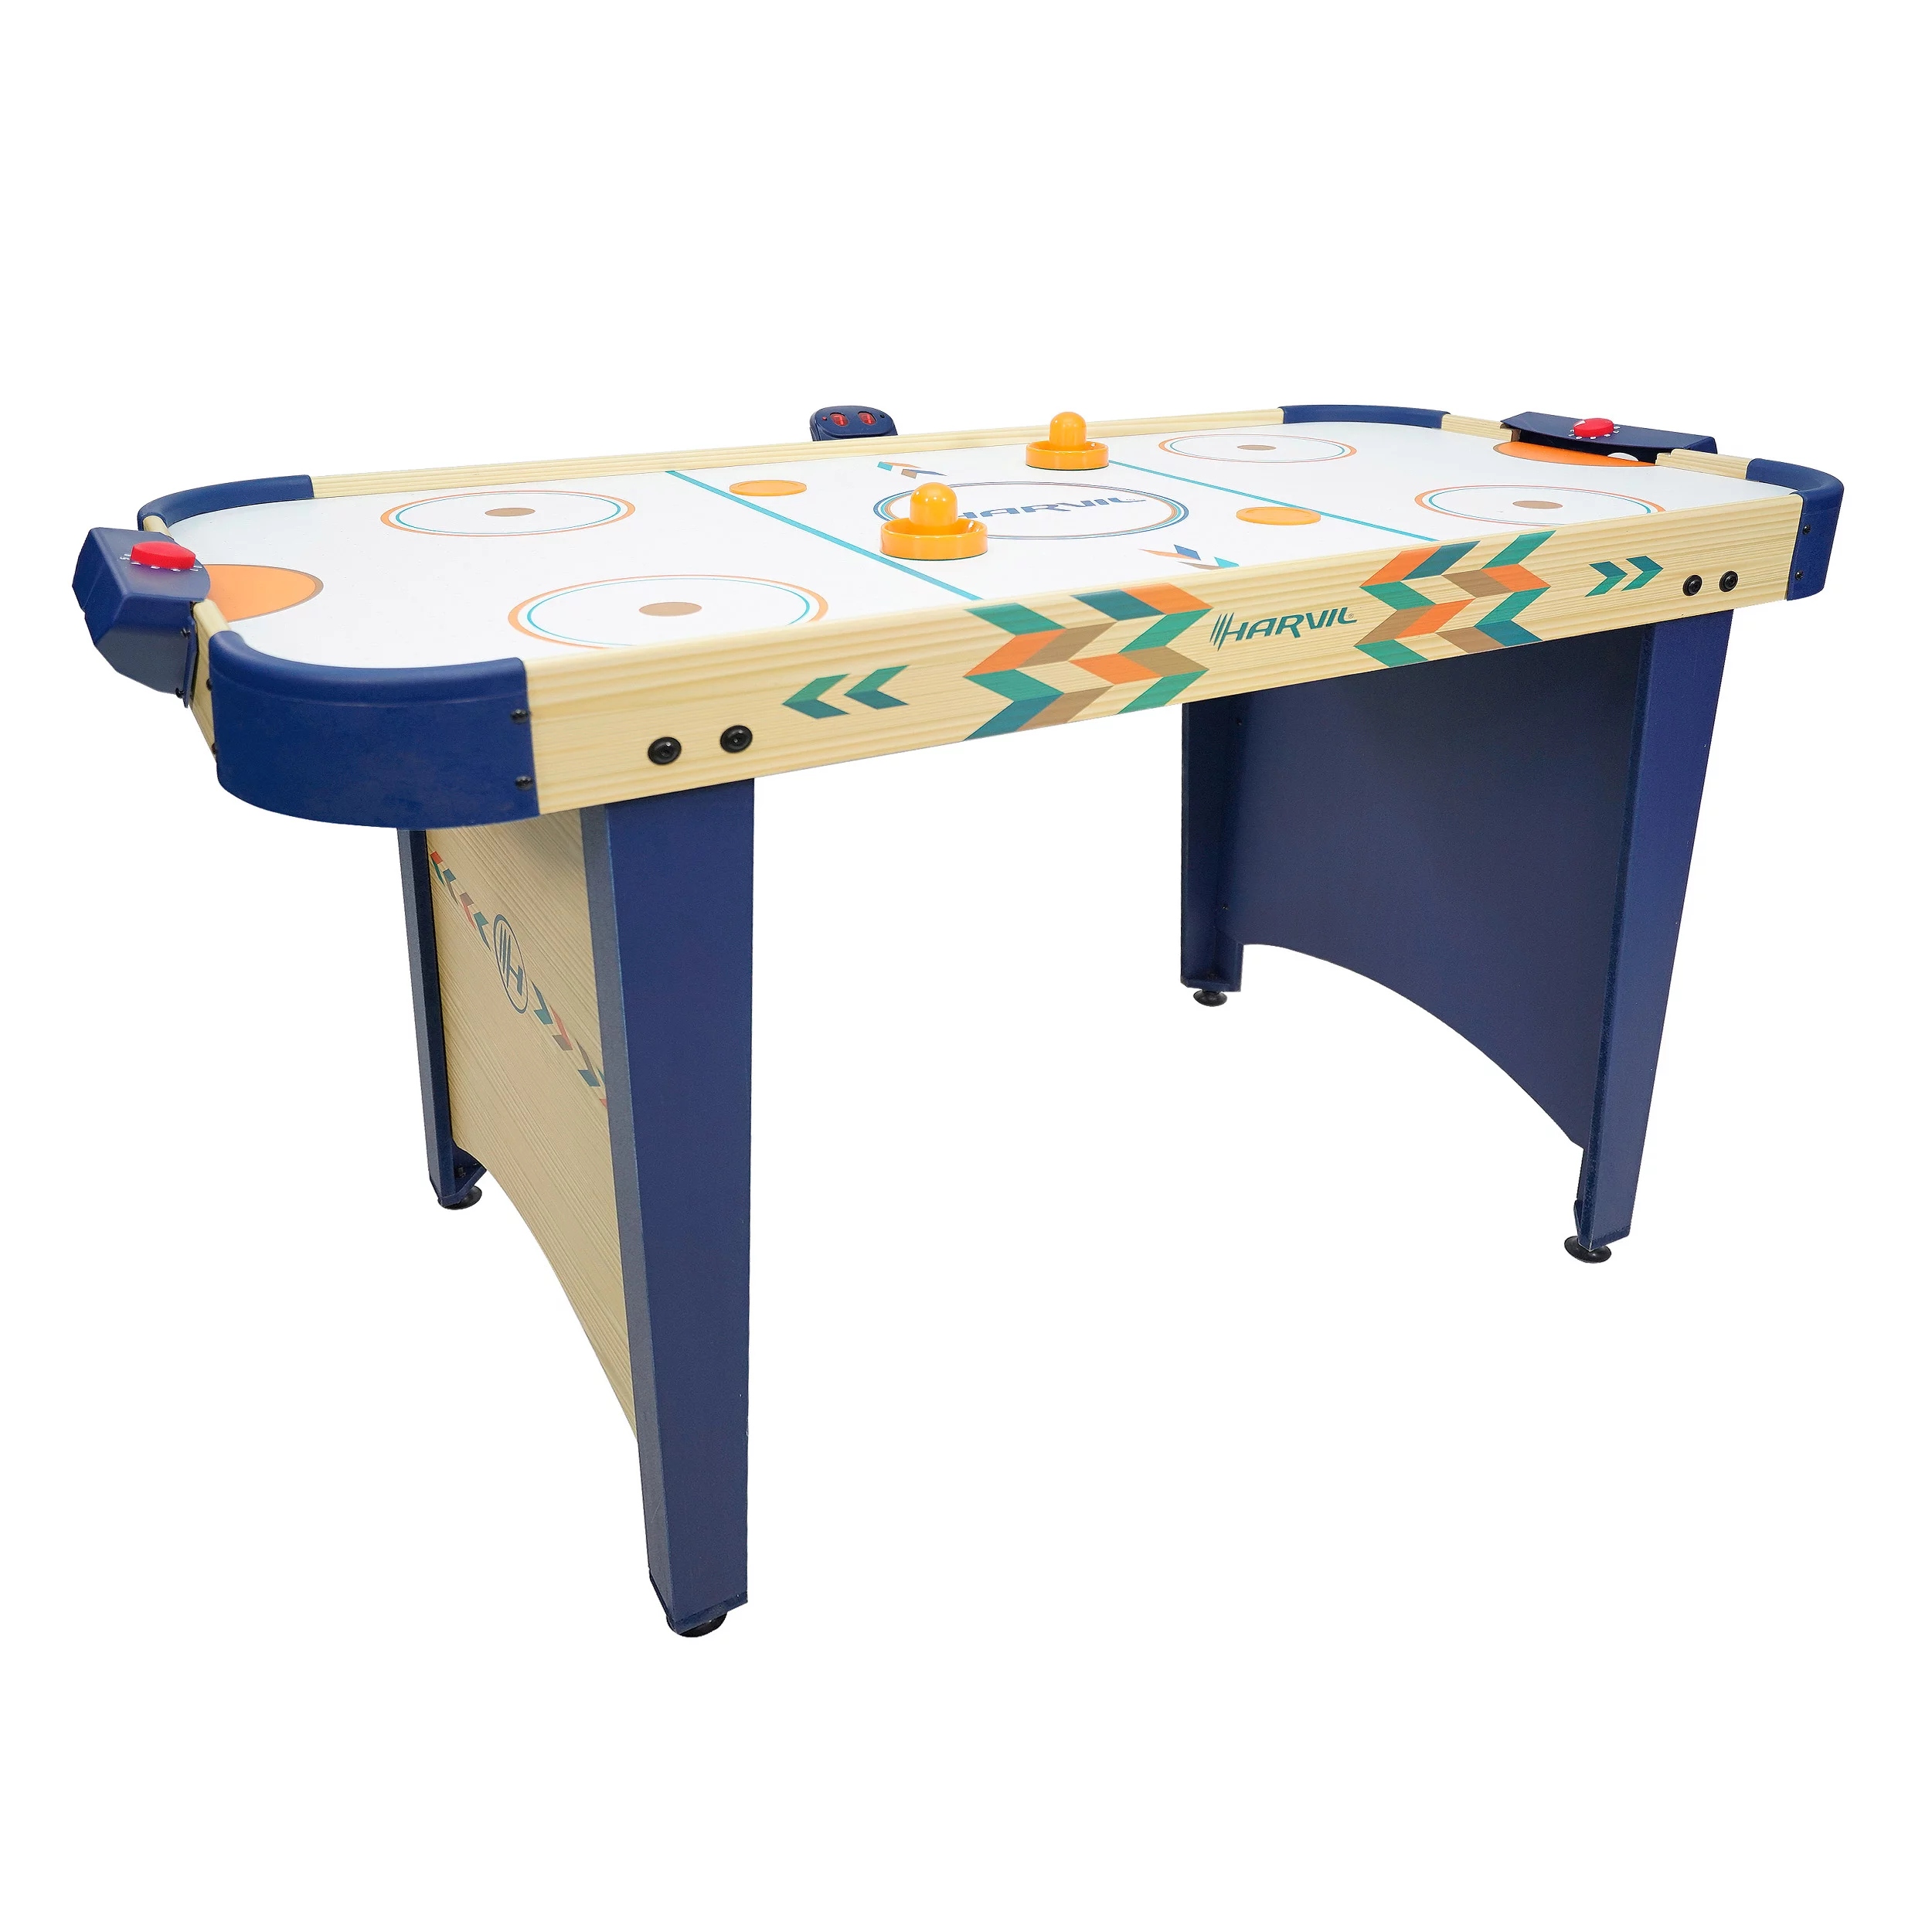 Blue and skin Harvil 4 Foot Air Hockey Game Table